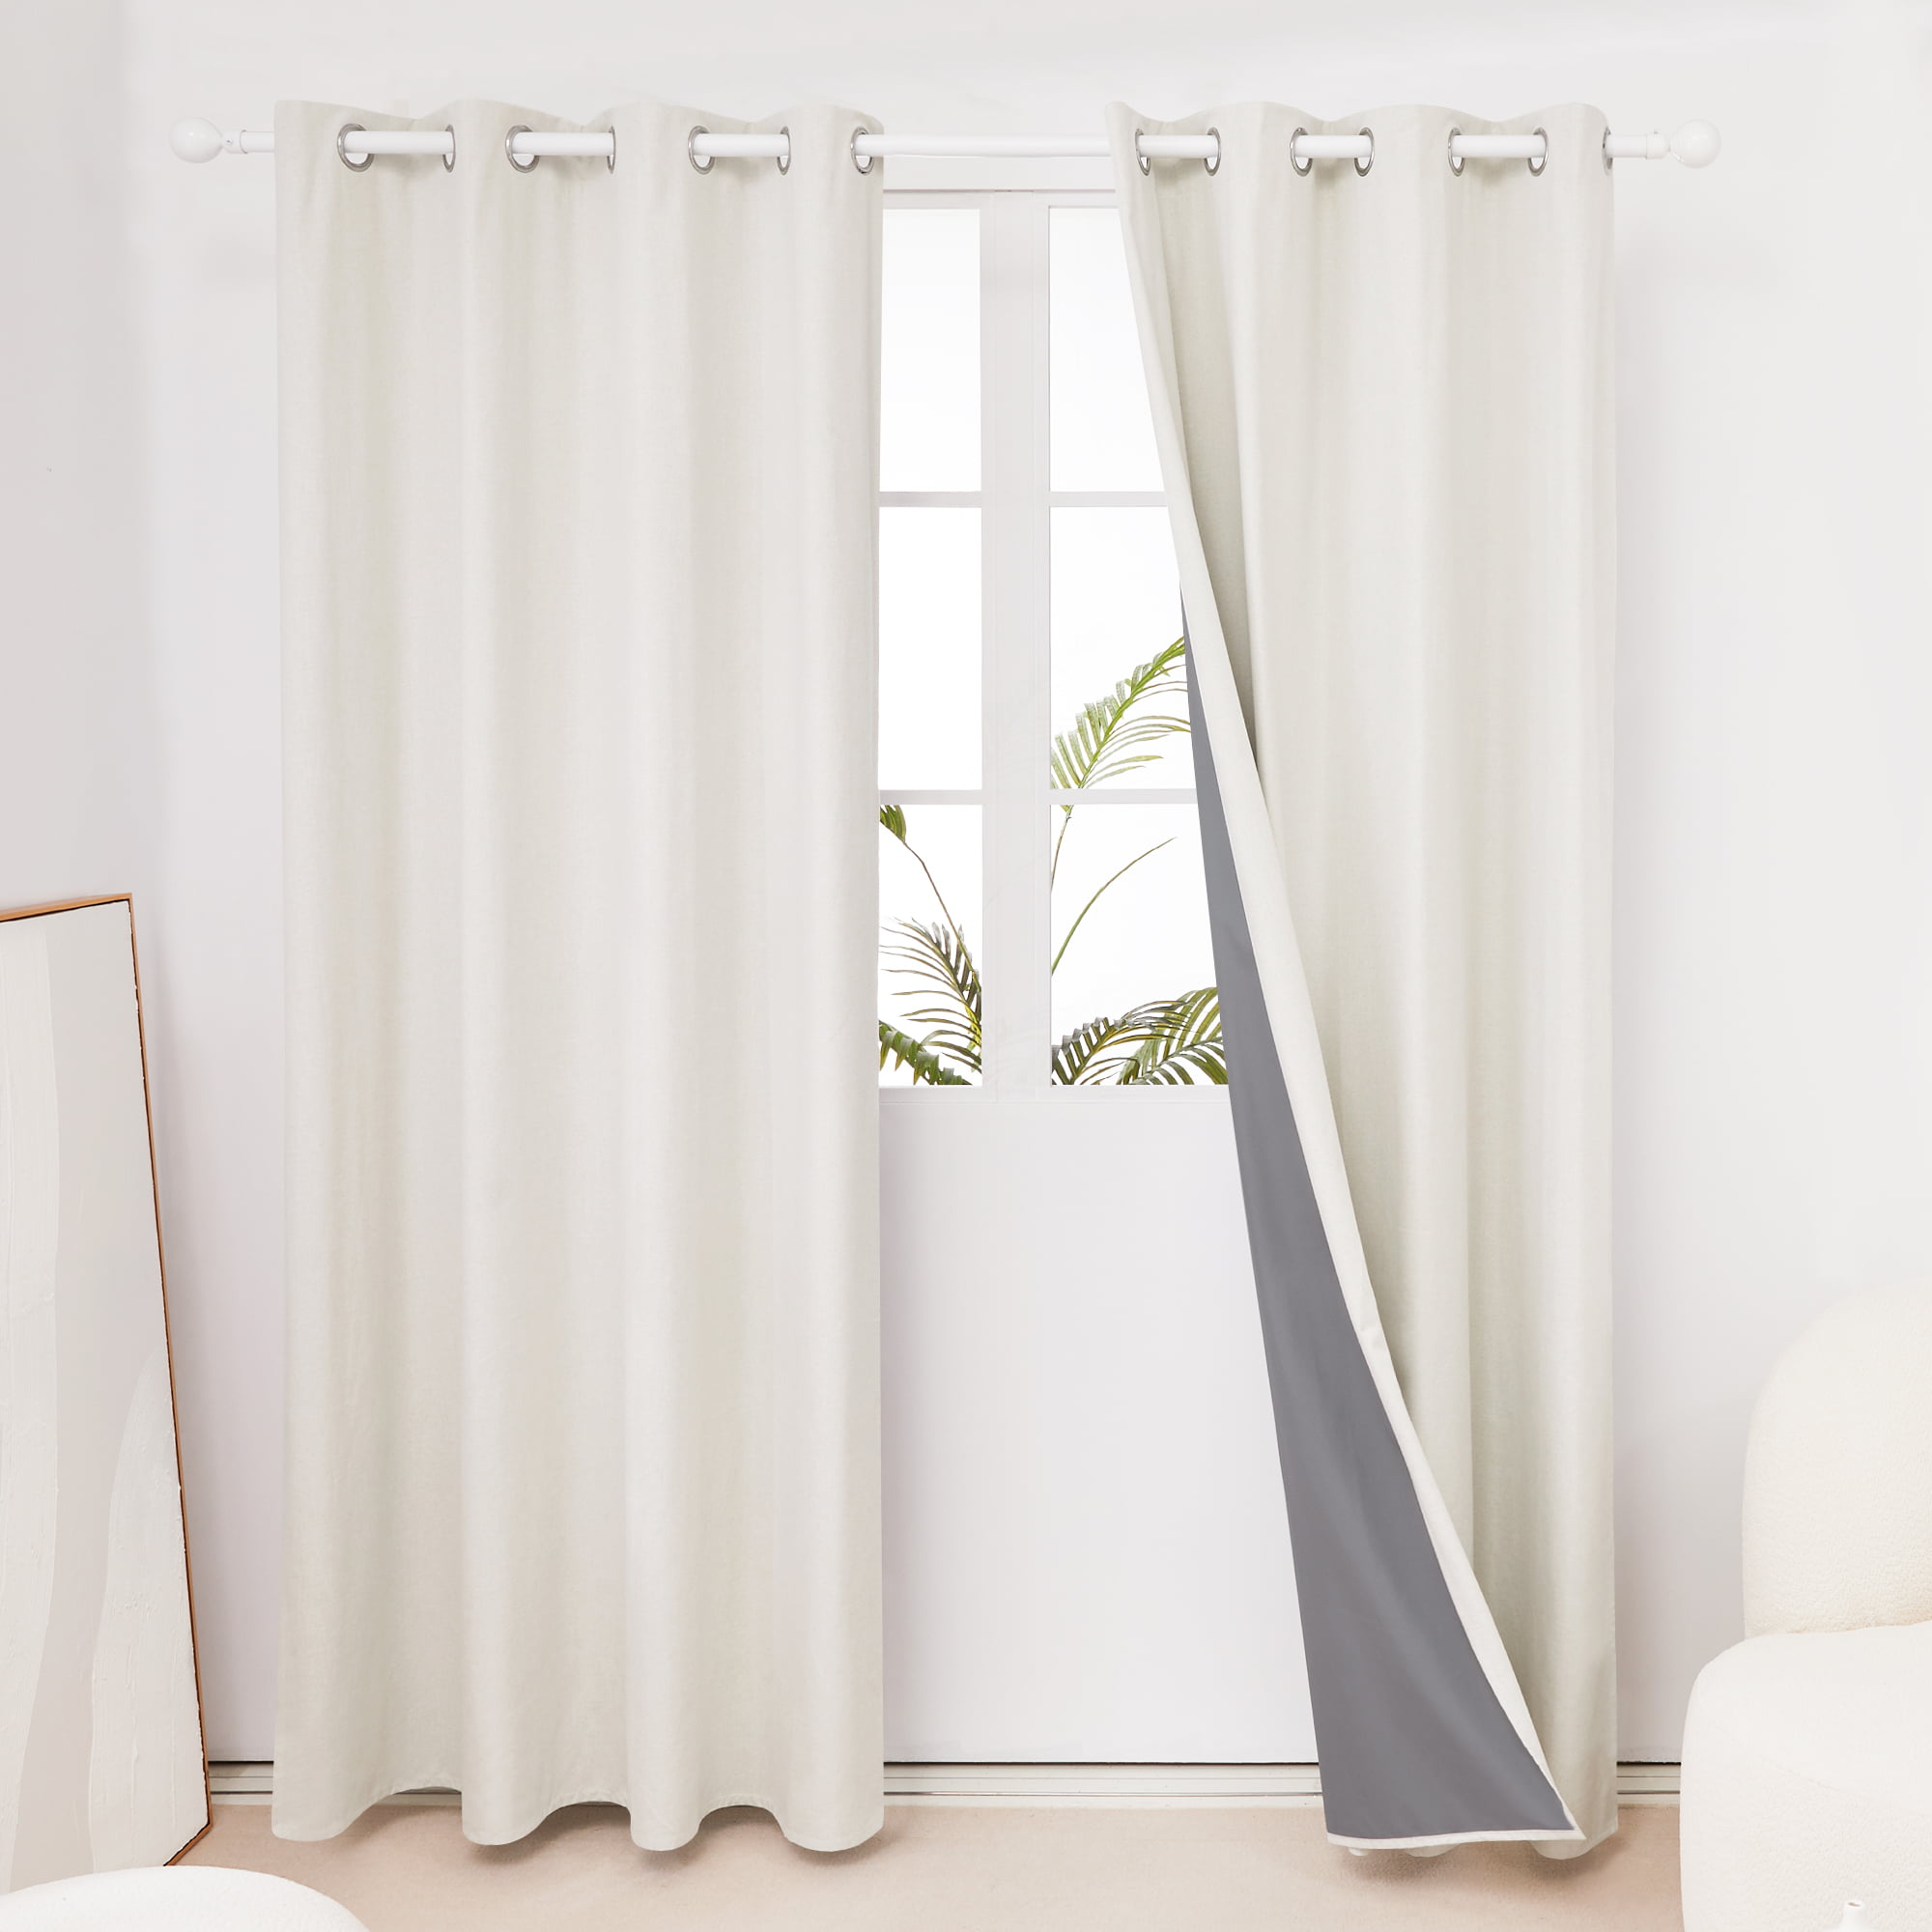 Grayish White, 52x72 Inch, Set of 2 Deconovo 100% Blackout Curtains Room Darkening Curtains for Living Room Linen Look Soundproof Curtains 